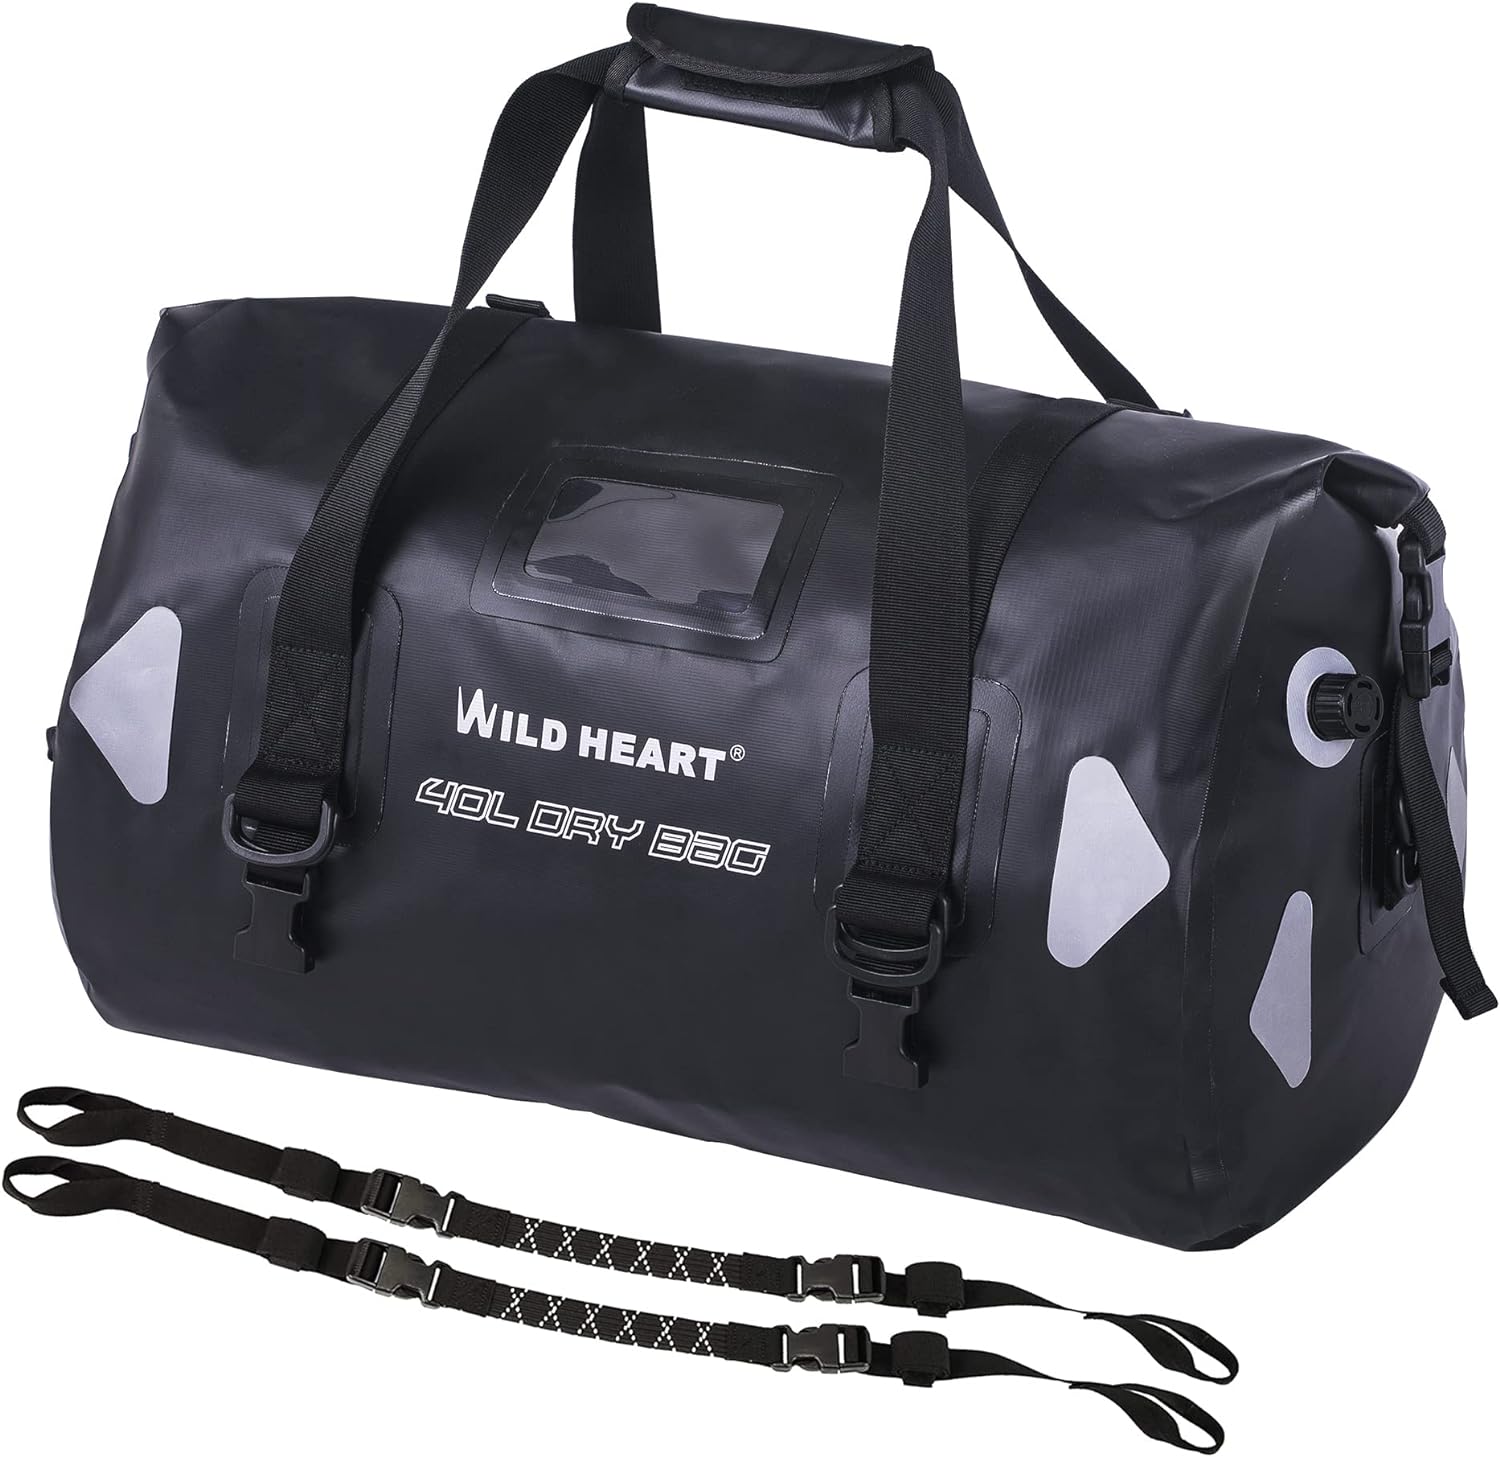 WILD HEART Waterproof Motorcycle Duffel Bag PVC500D Double-bottom With Rope Straps and Inner Pocket 40L 66L 100L for Kayaking, Camping, Boating,Motorcycle